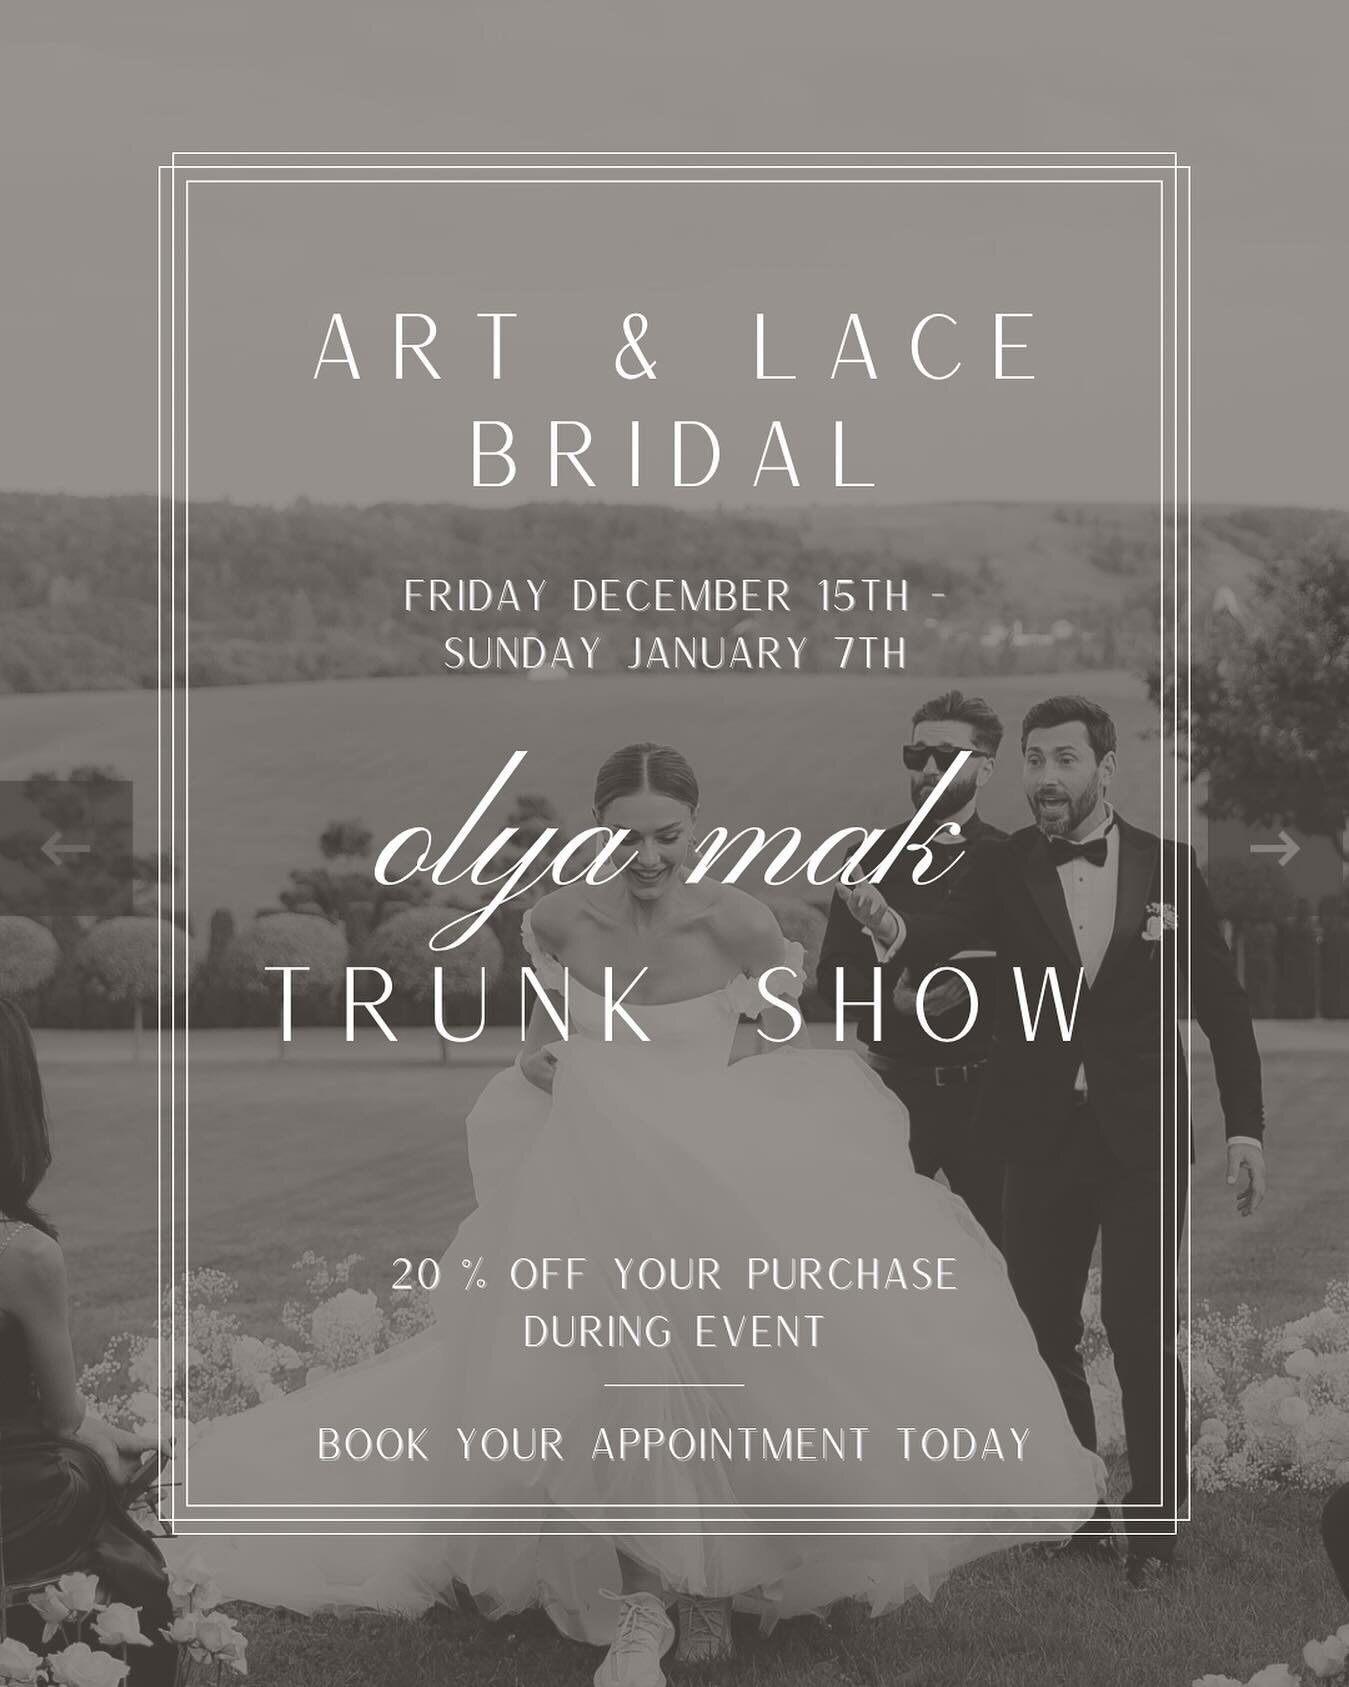 TRUNK SHOW ALERT 🧳 - join us for our first ever trunk show with collections from designer @olyamak_wedding @olyamak_official 

Come in and shop the collections this Friday December, 15th thru Sunday, January 7th and receive 20% off your purchase! 

